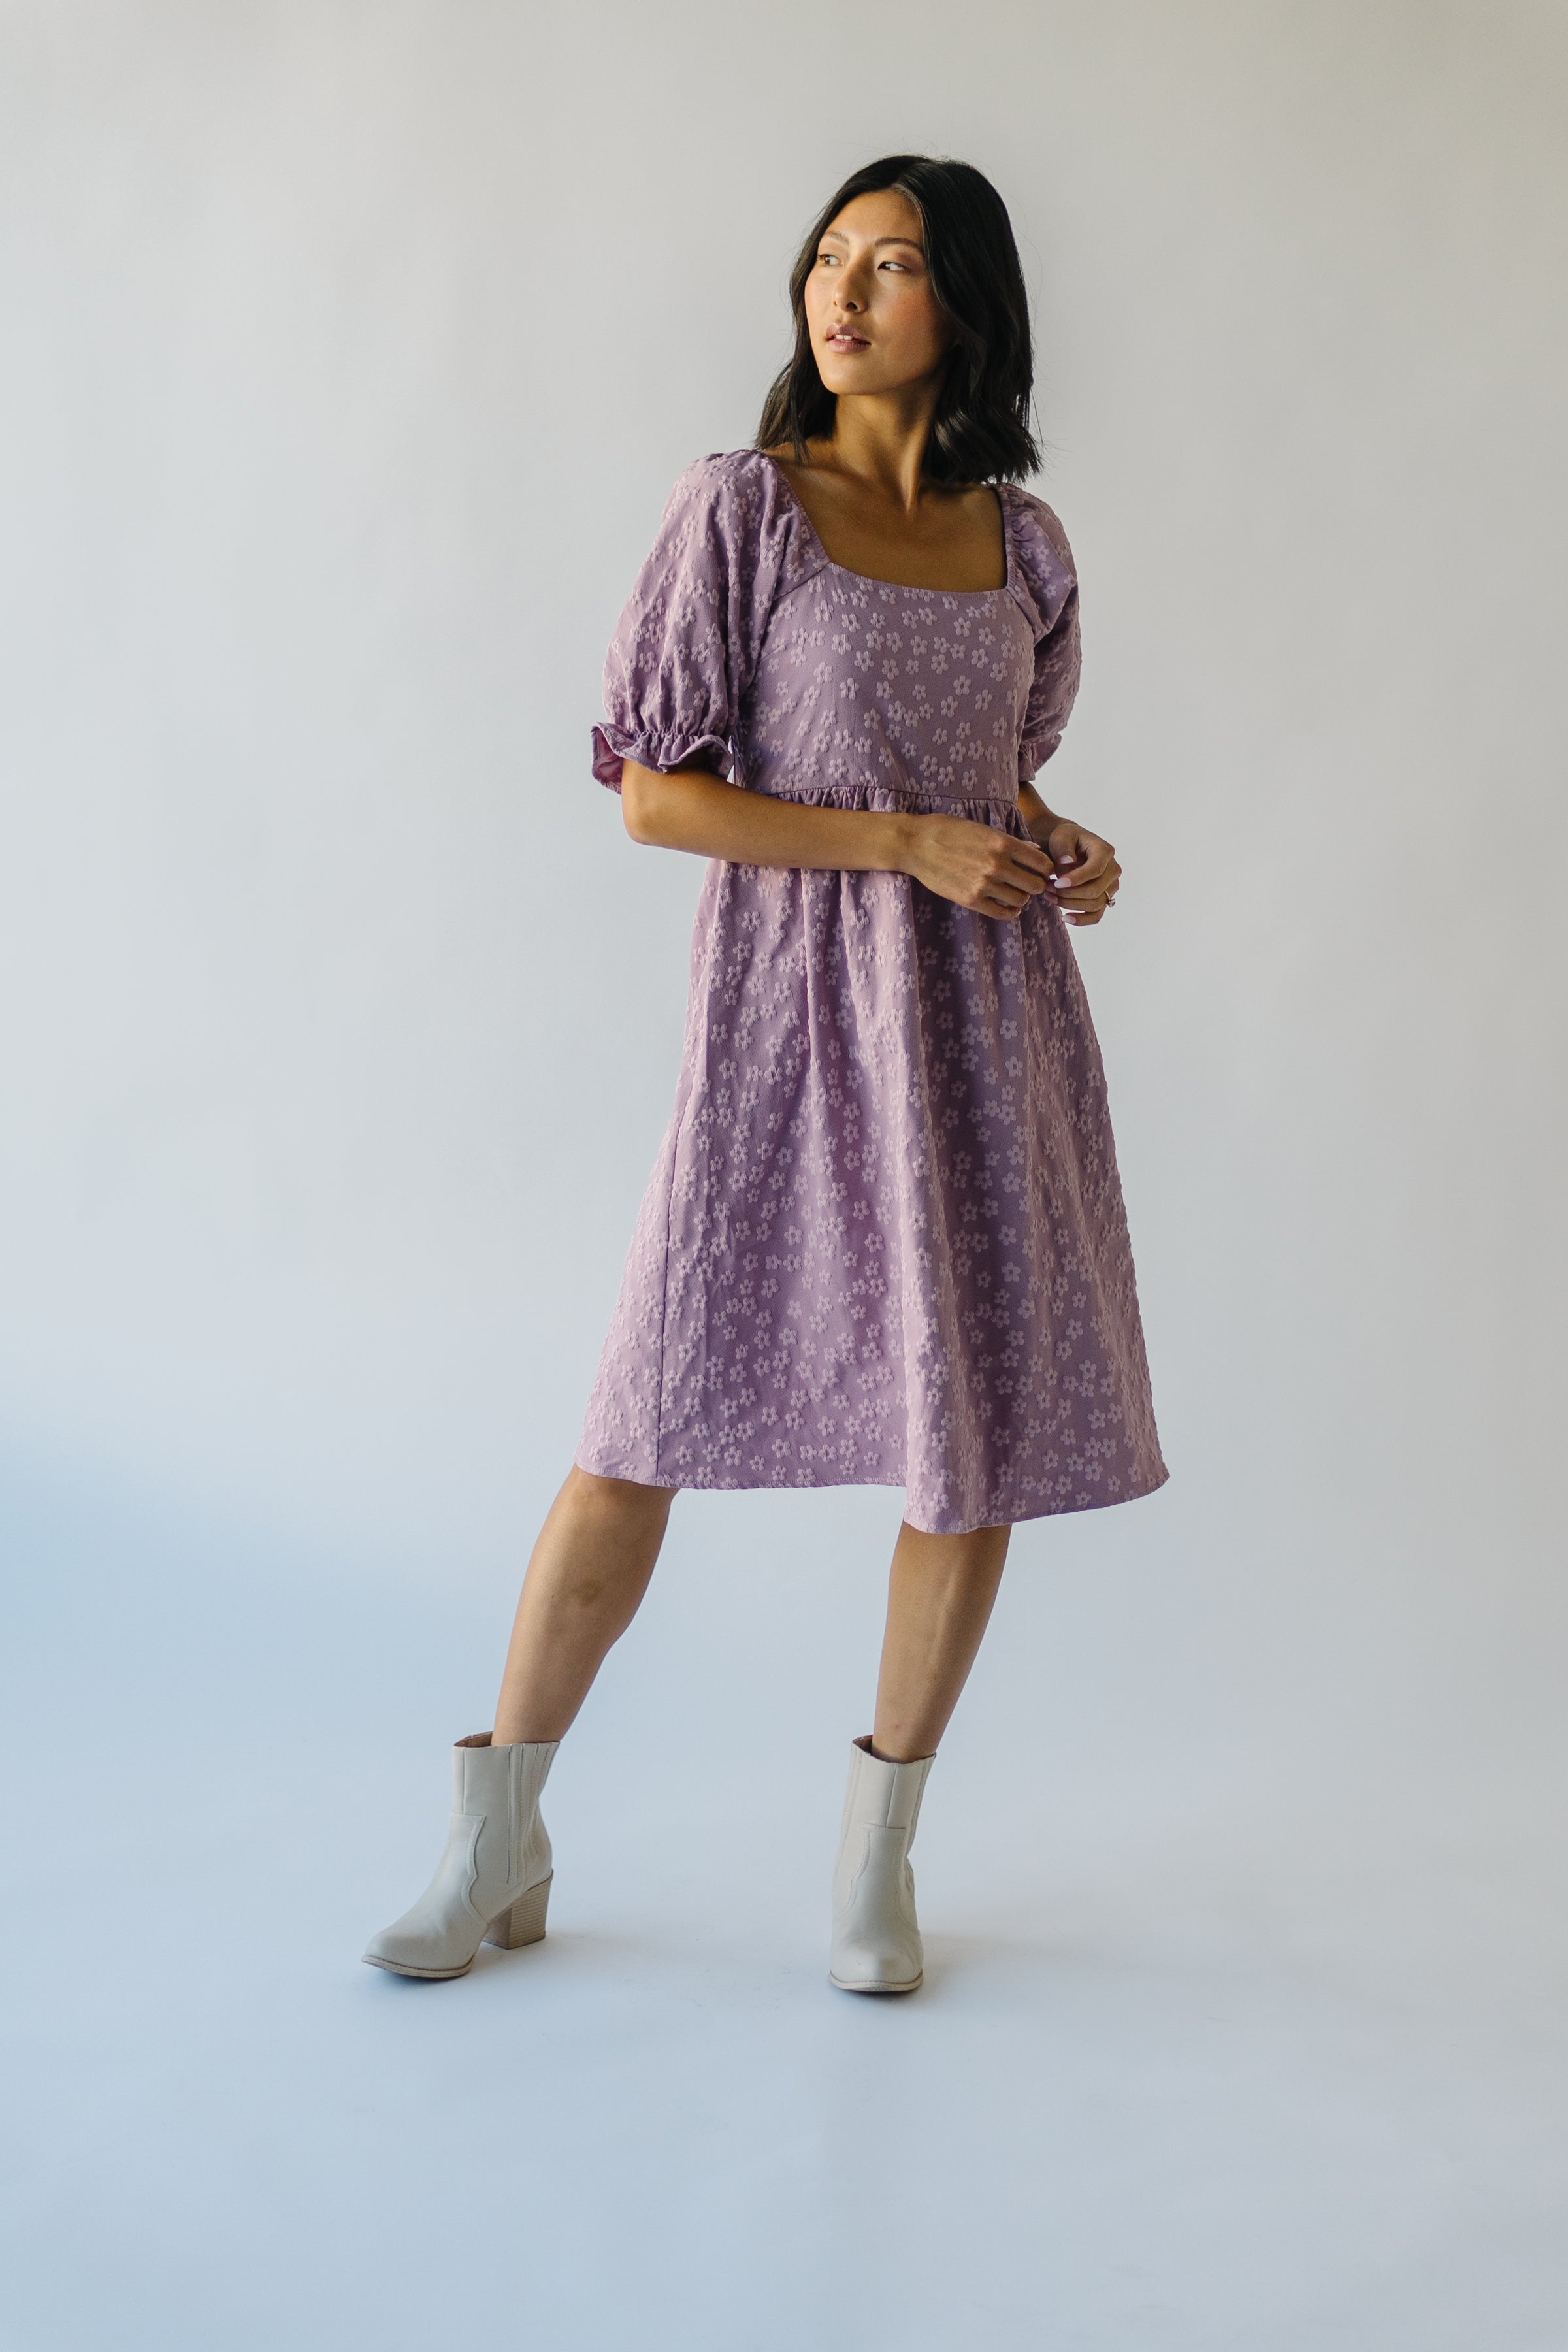 The Shasta Floral Square Neck Dress in Dusty Lavender – Piper & Scoot